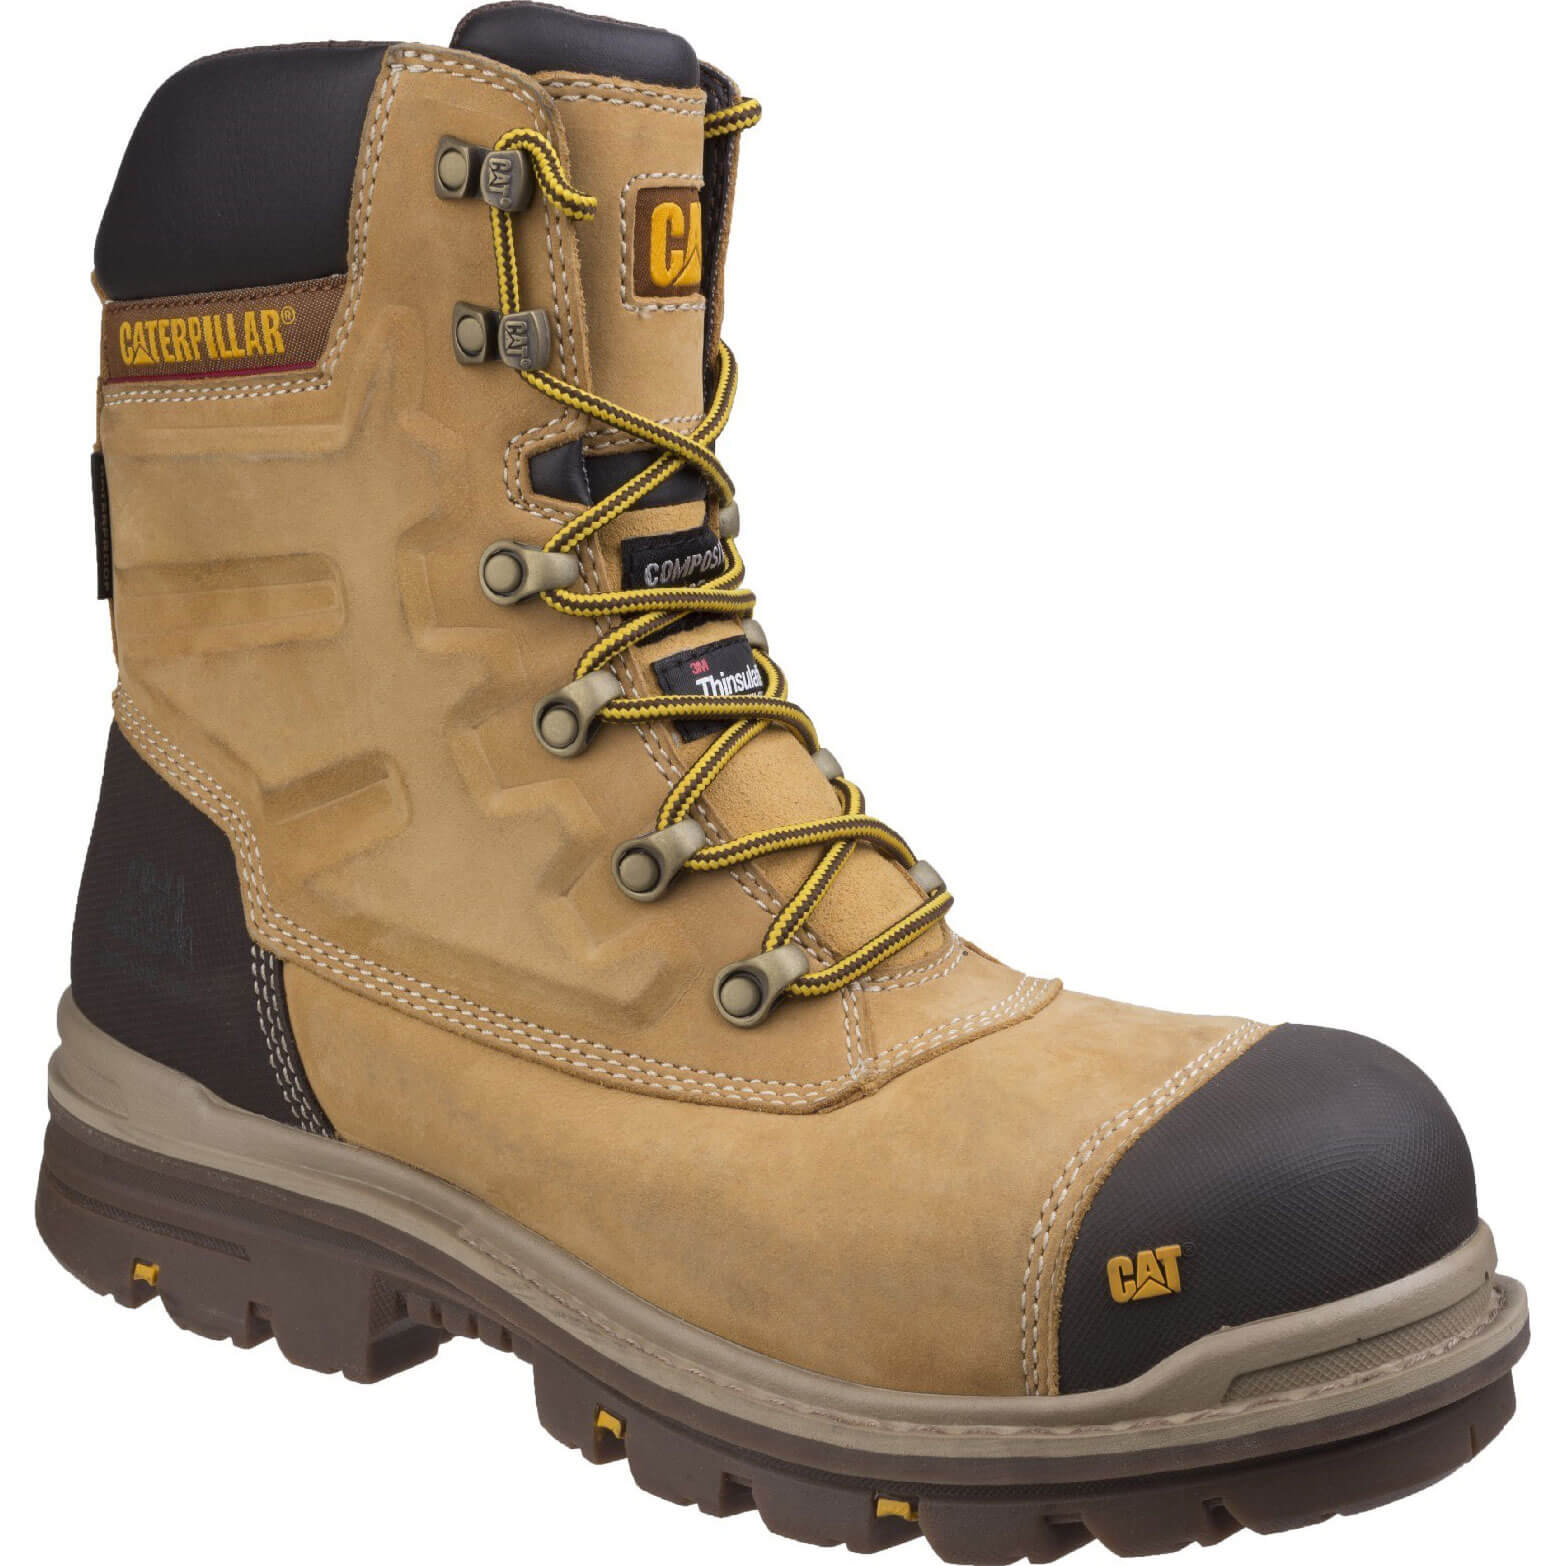 Image of Caterpillar Mens Premier Waterproof Safety Boots Honey Size 11